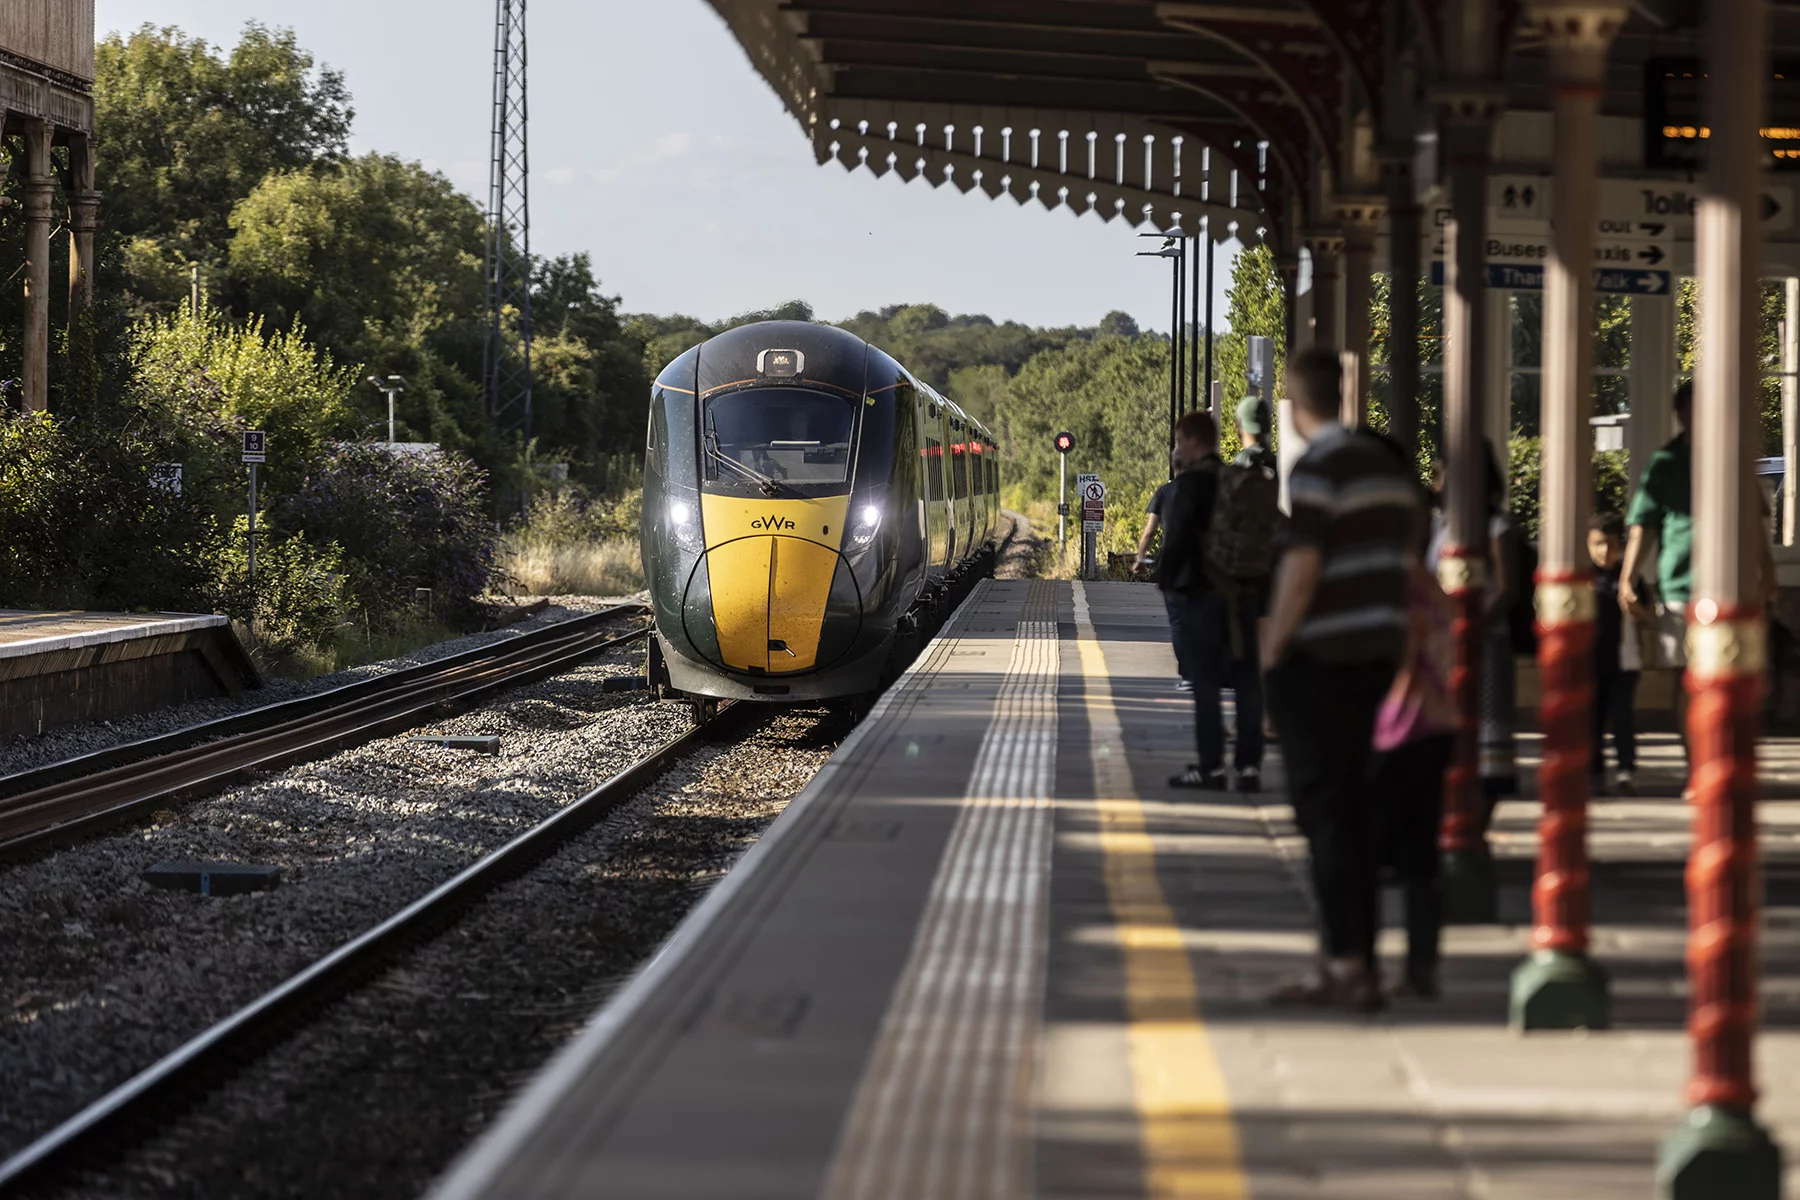 Train approaching a station platform in the UK